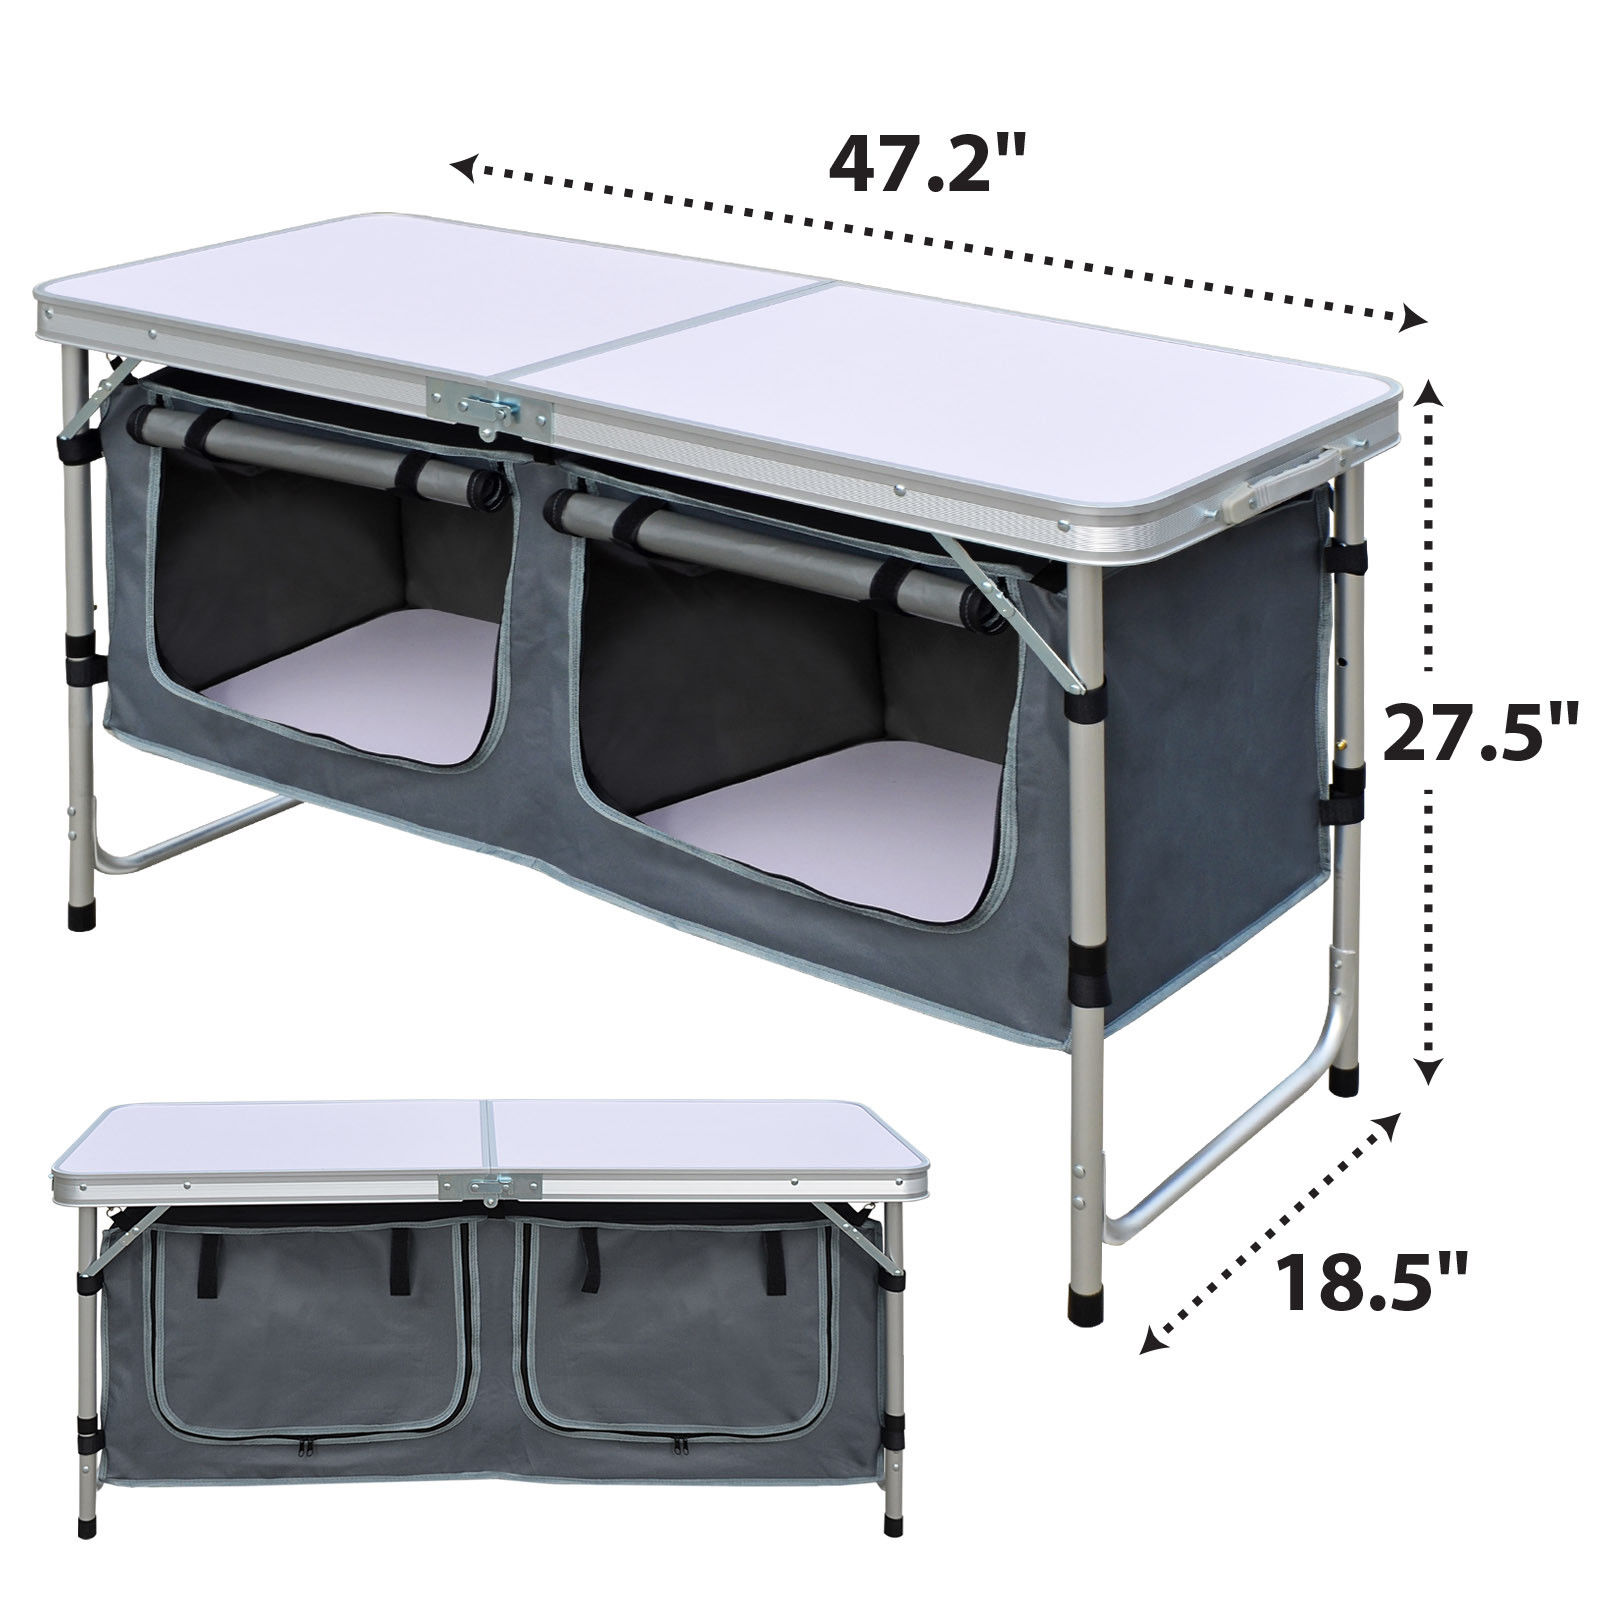 Sunrise Outdoor Folding Table 47 Inch Aluminum Lightweight Camping Picnic Table Adjustable Height with Storage Organizer - image 3 of 11